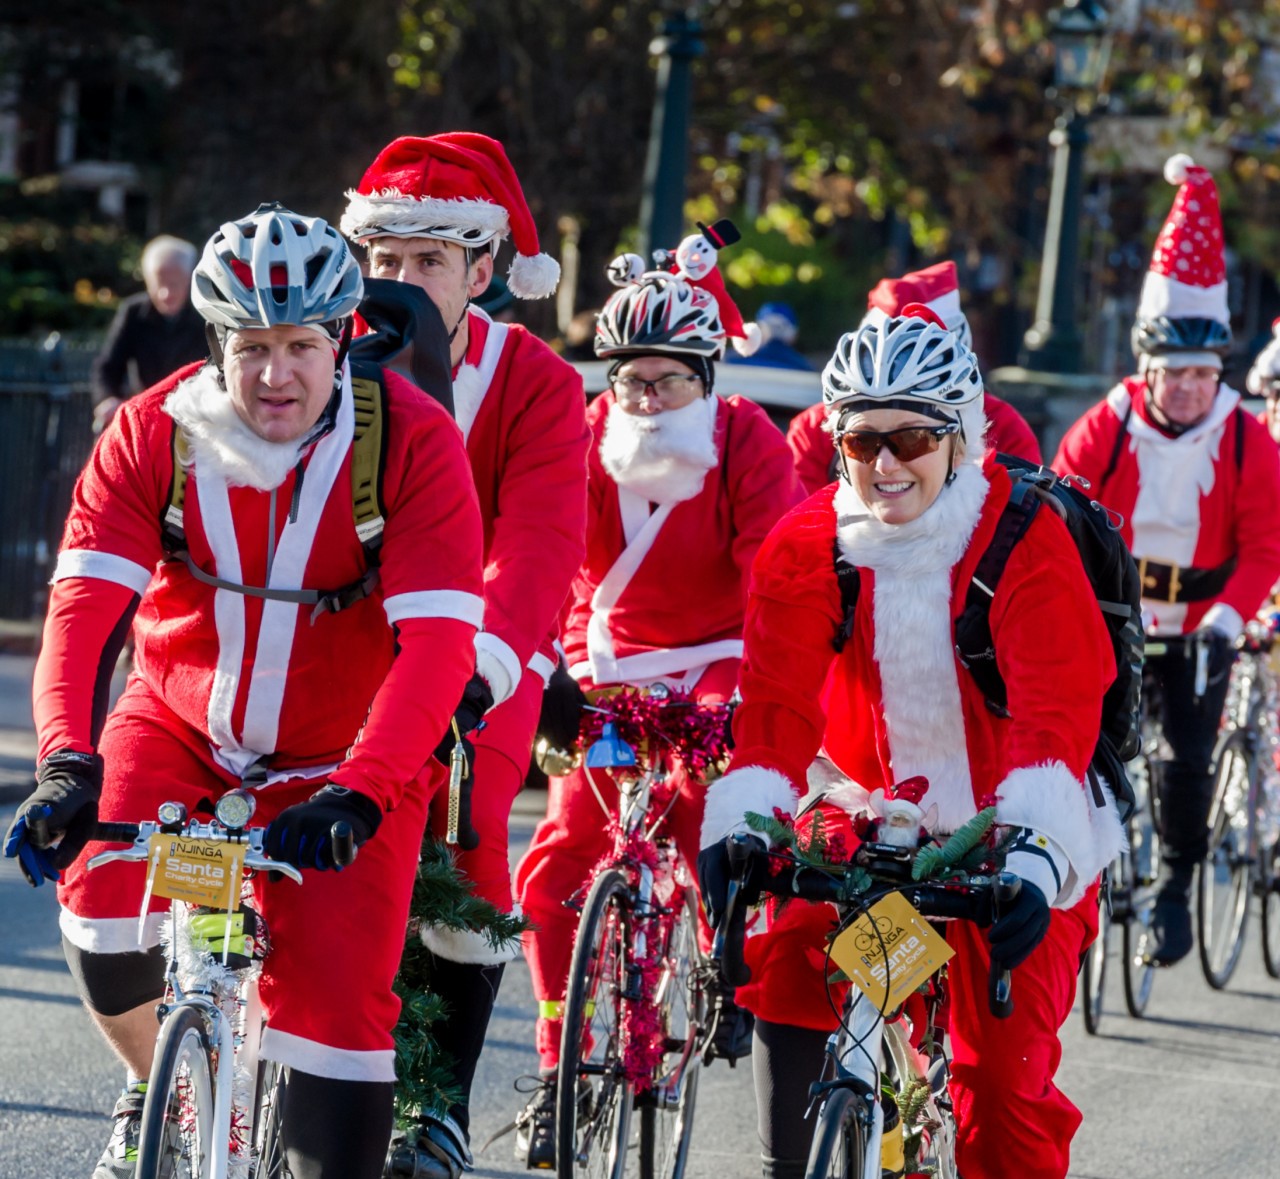 Cyclists dressed as Santa Claus